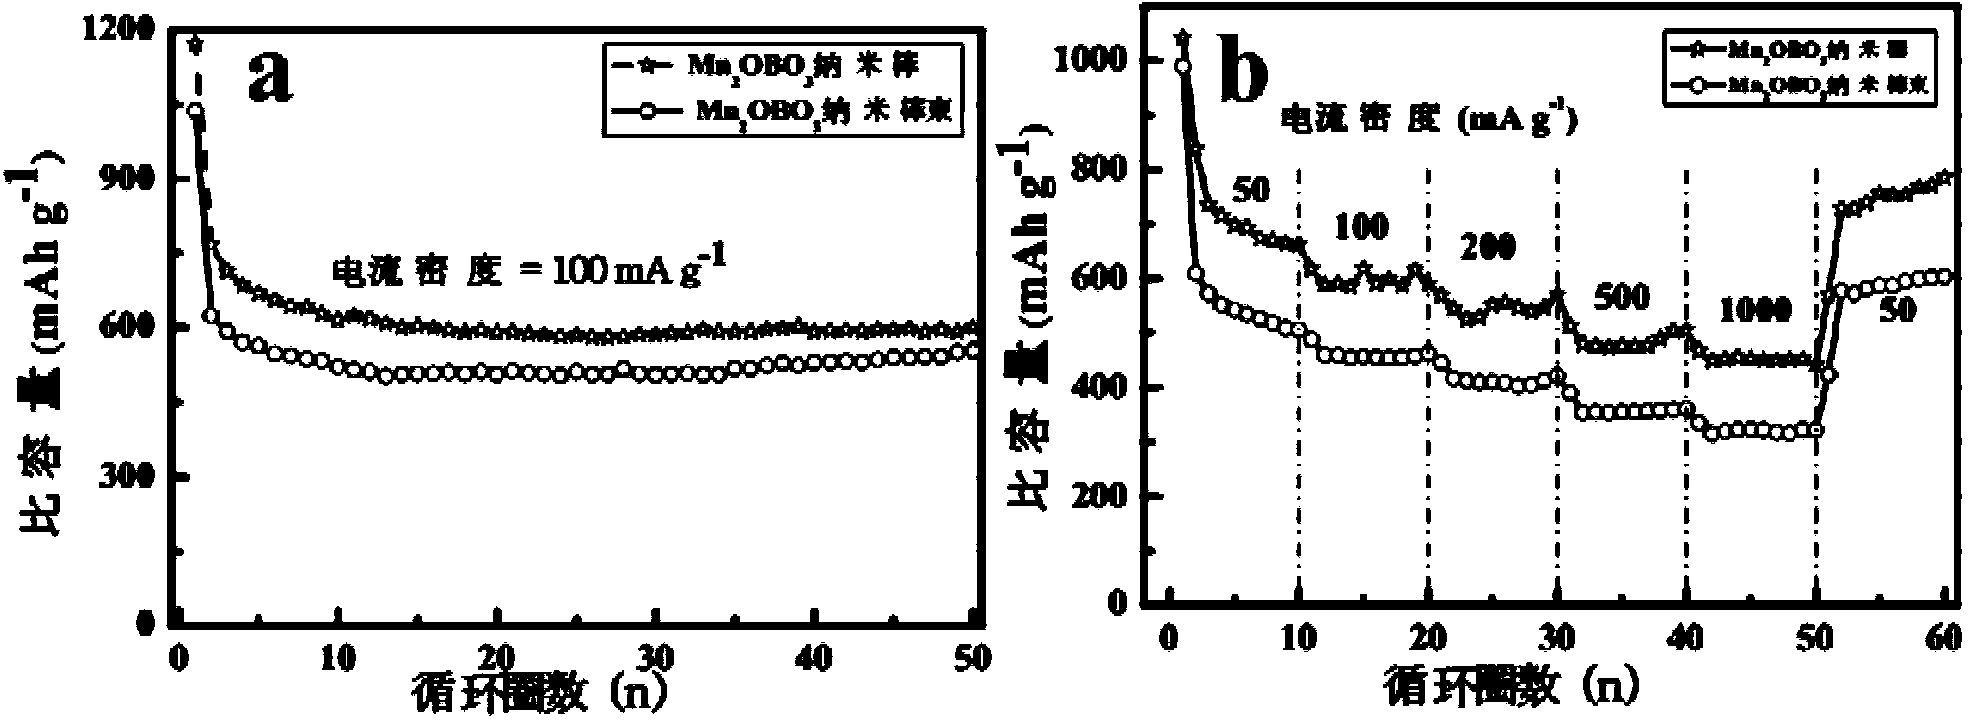 Preparation method of high-performance lithium ion battery negative material Mn2OBO3